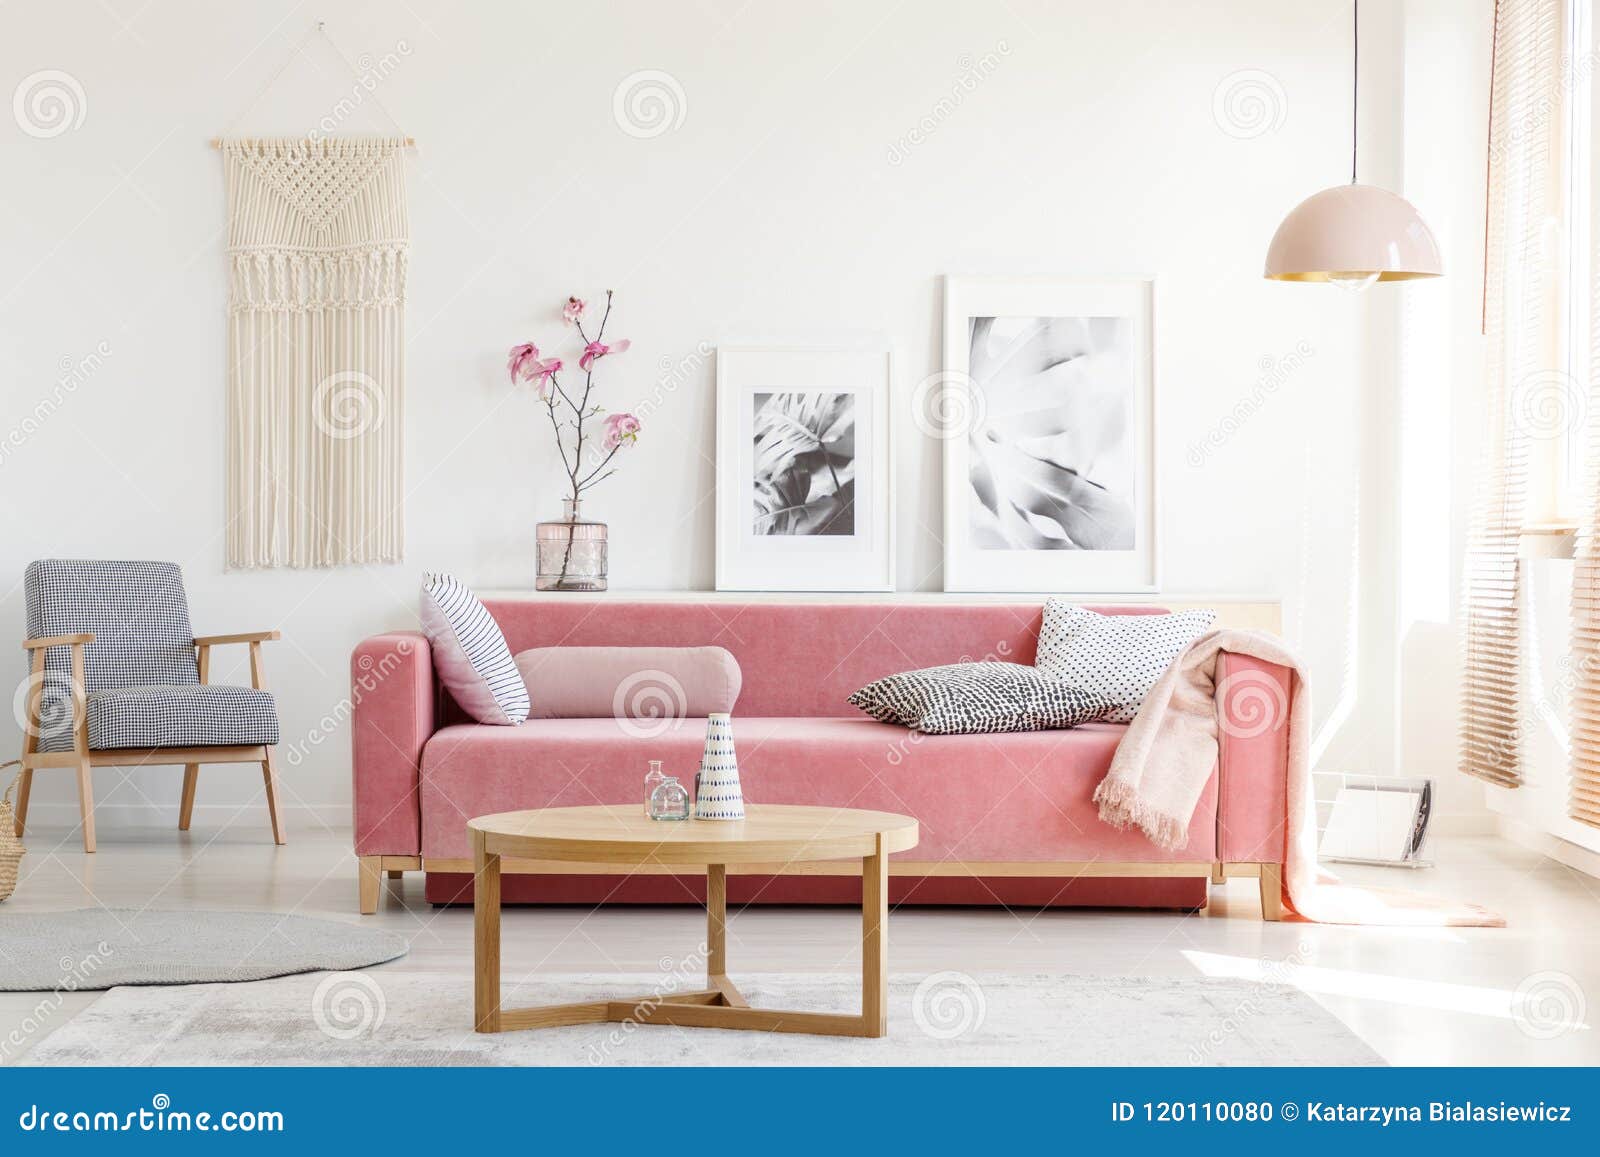 patterned armchair and pink couch in feminist apartment interior